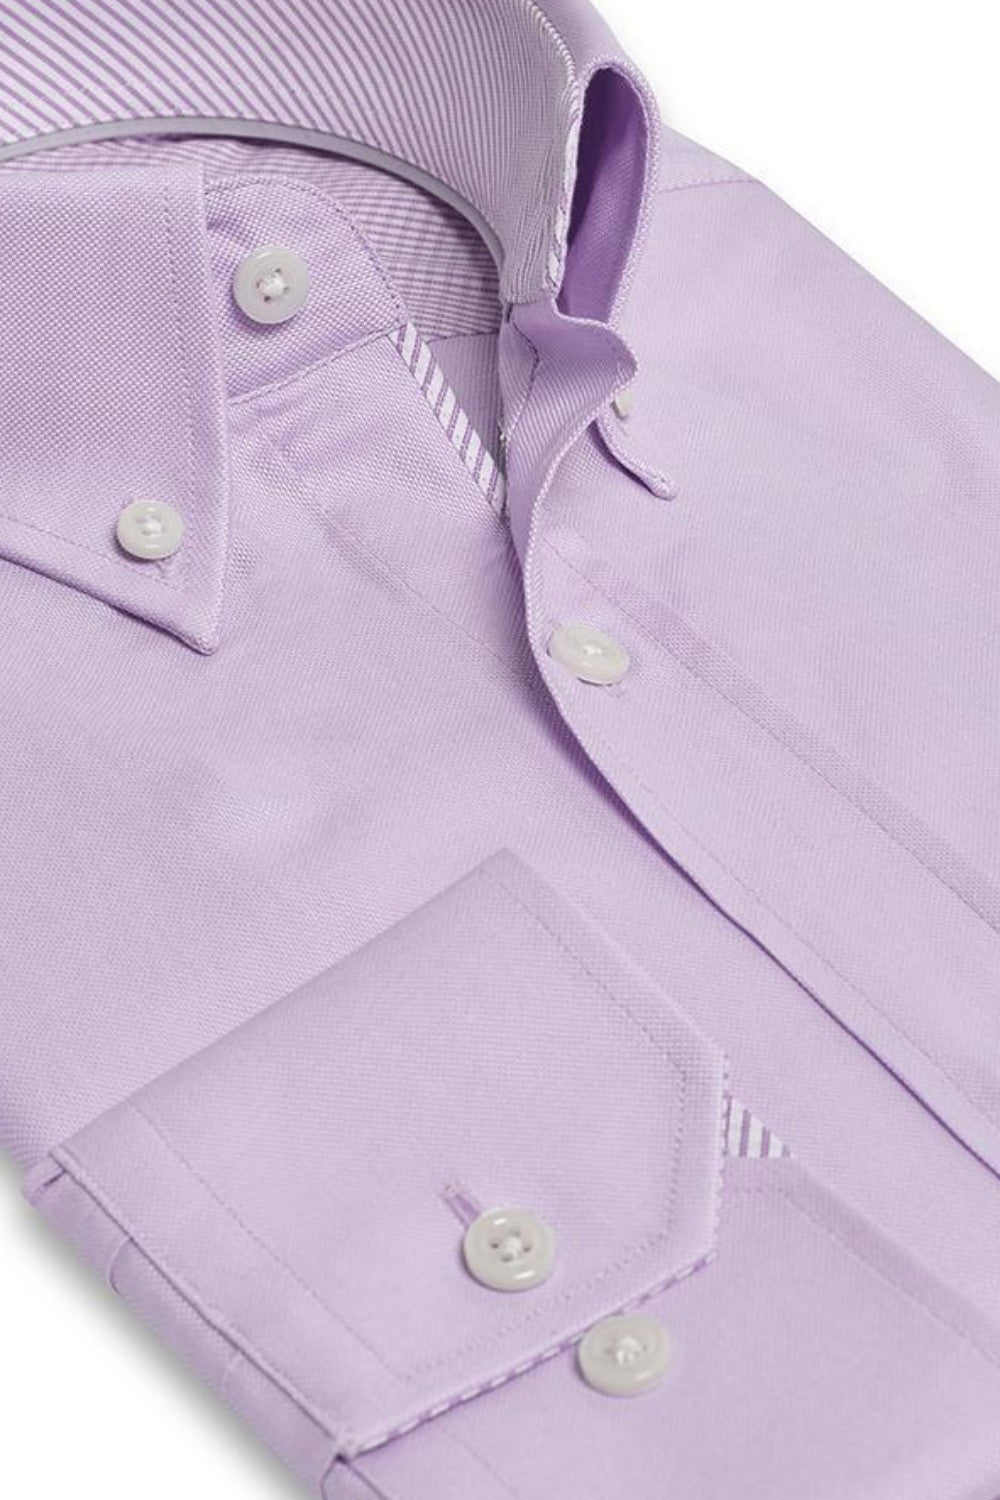 FRANKLIN PINK BUTTON DOWN DRESS SHIRT - CASUAL /FORMAL EVENT - SIDE VIEW